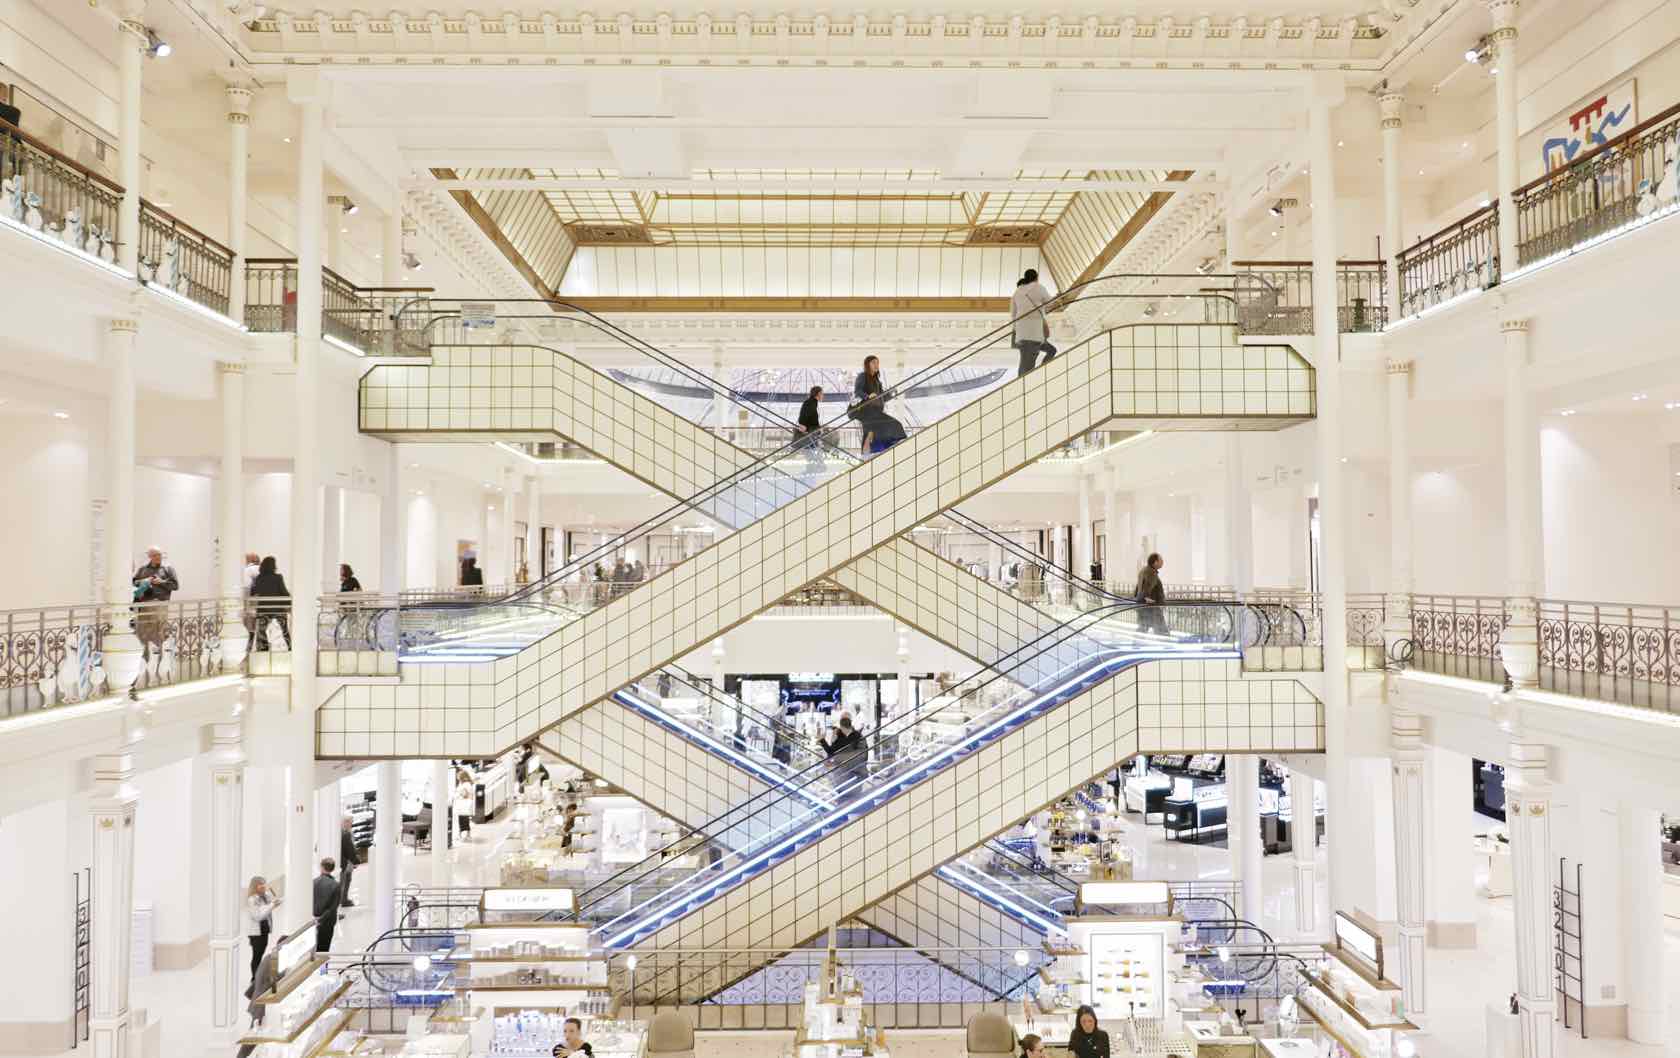 Le Bon Marche, the first departmental store in the world